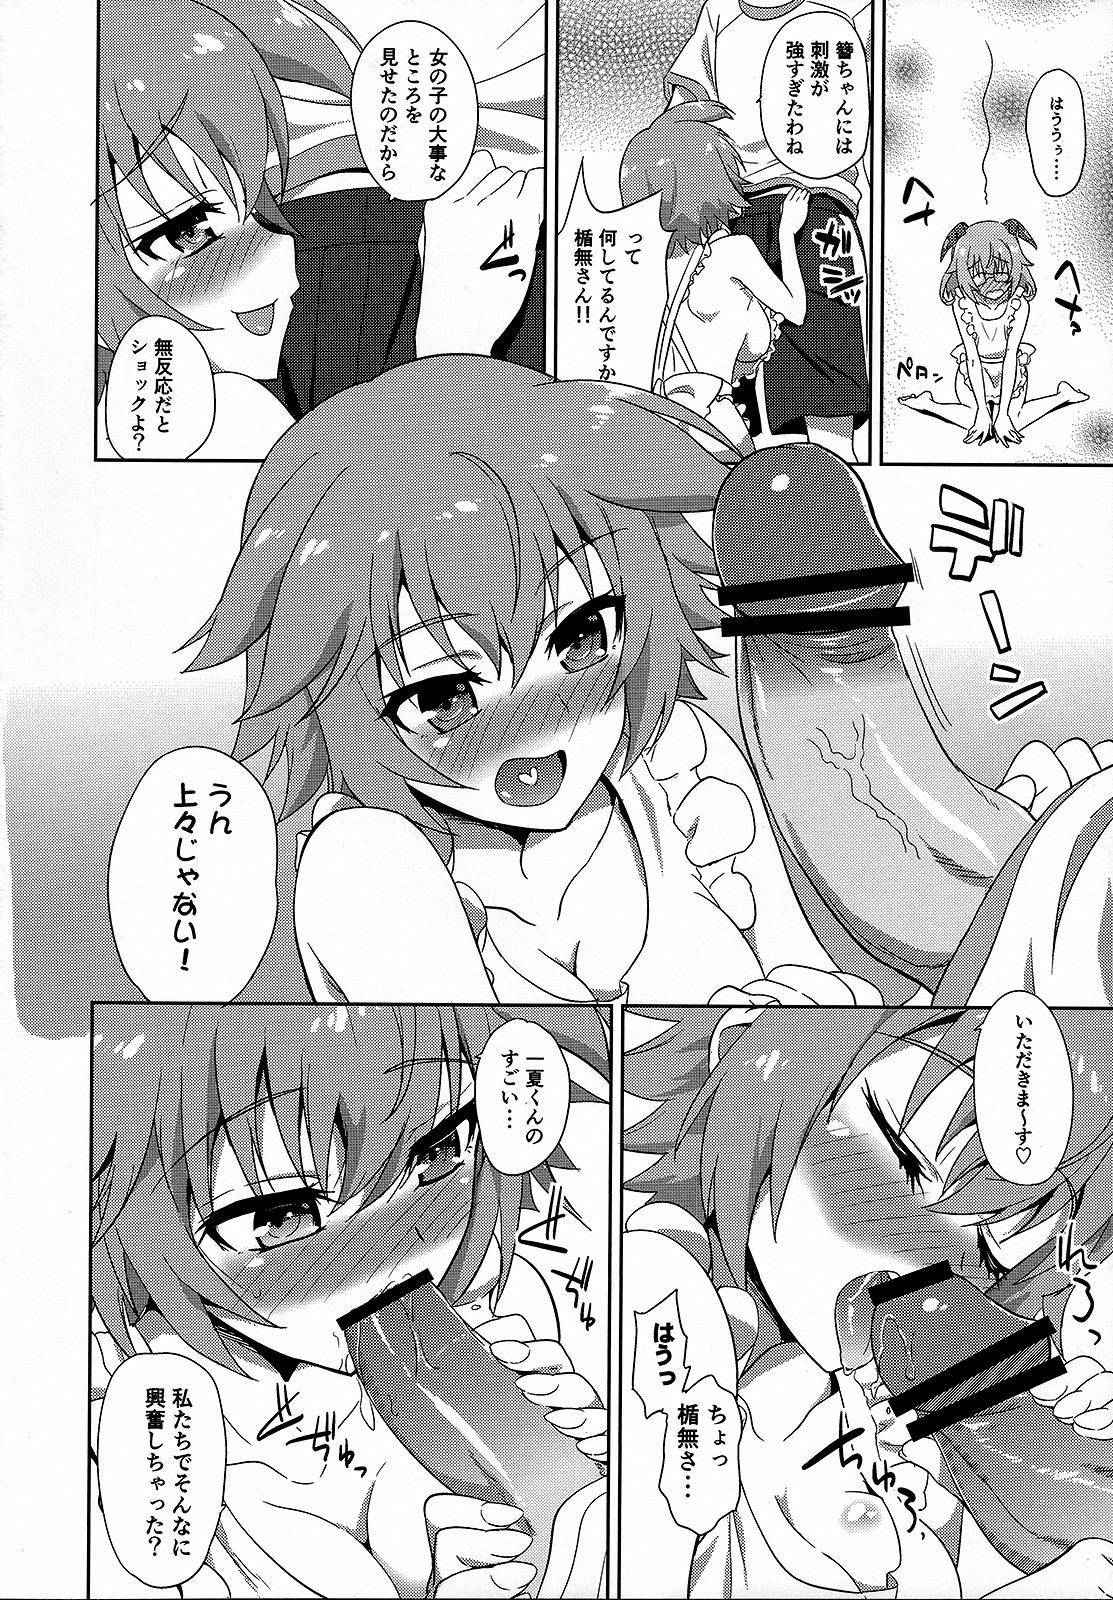 Boquete IS ICHIKA LOVE SISTERS!! - Infinite stratos Tight Pussy Fucked - Page 5